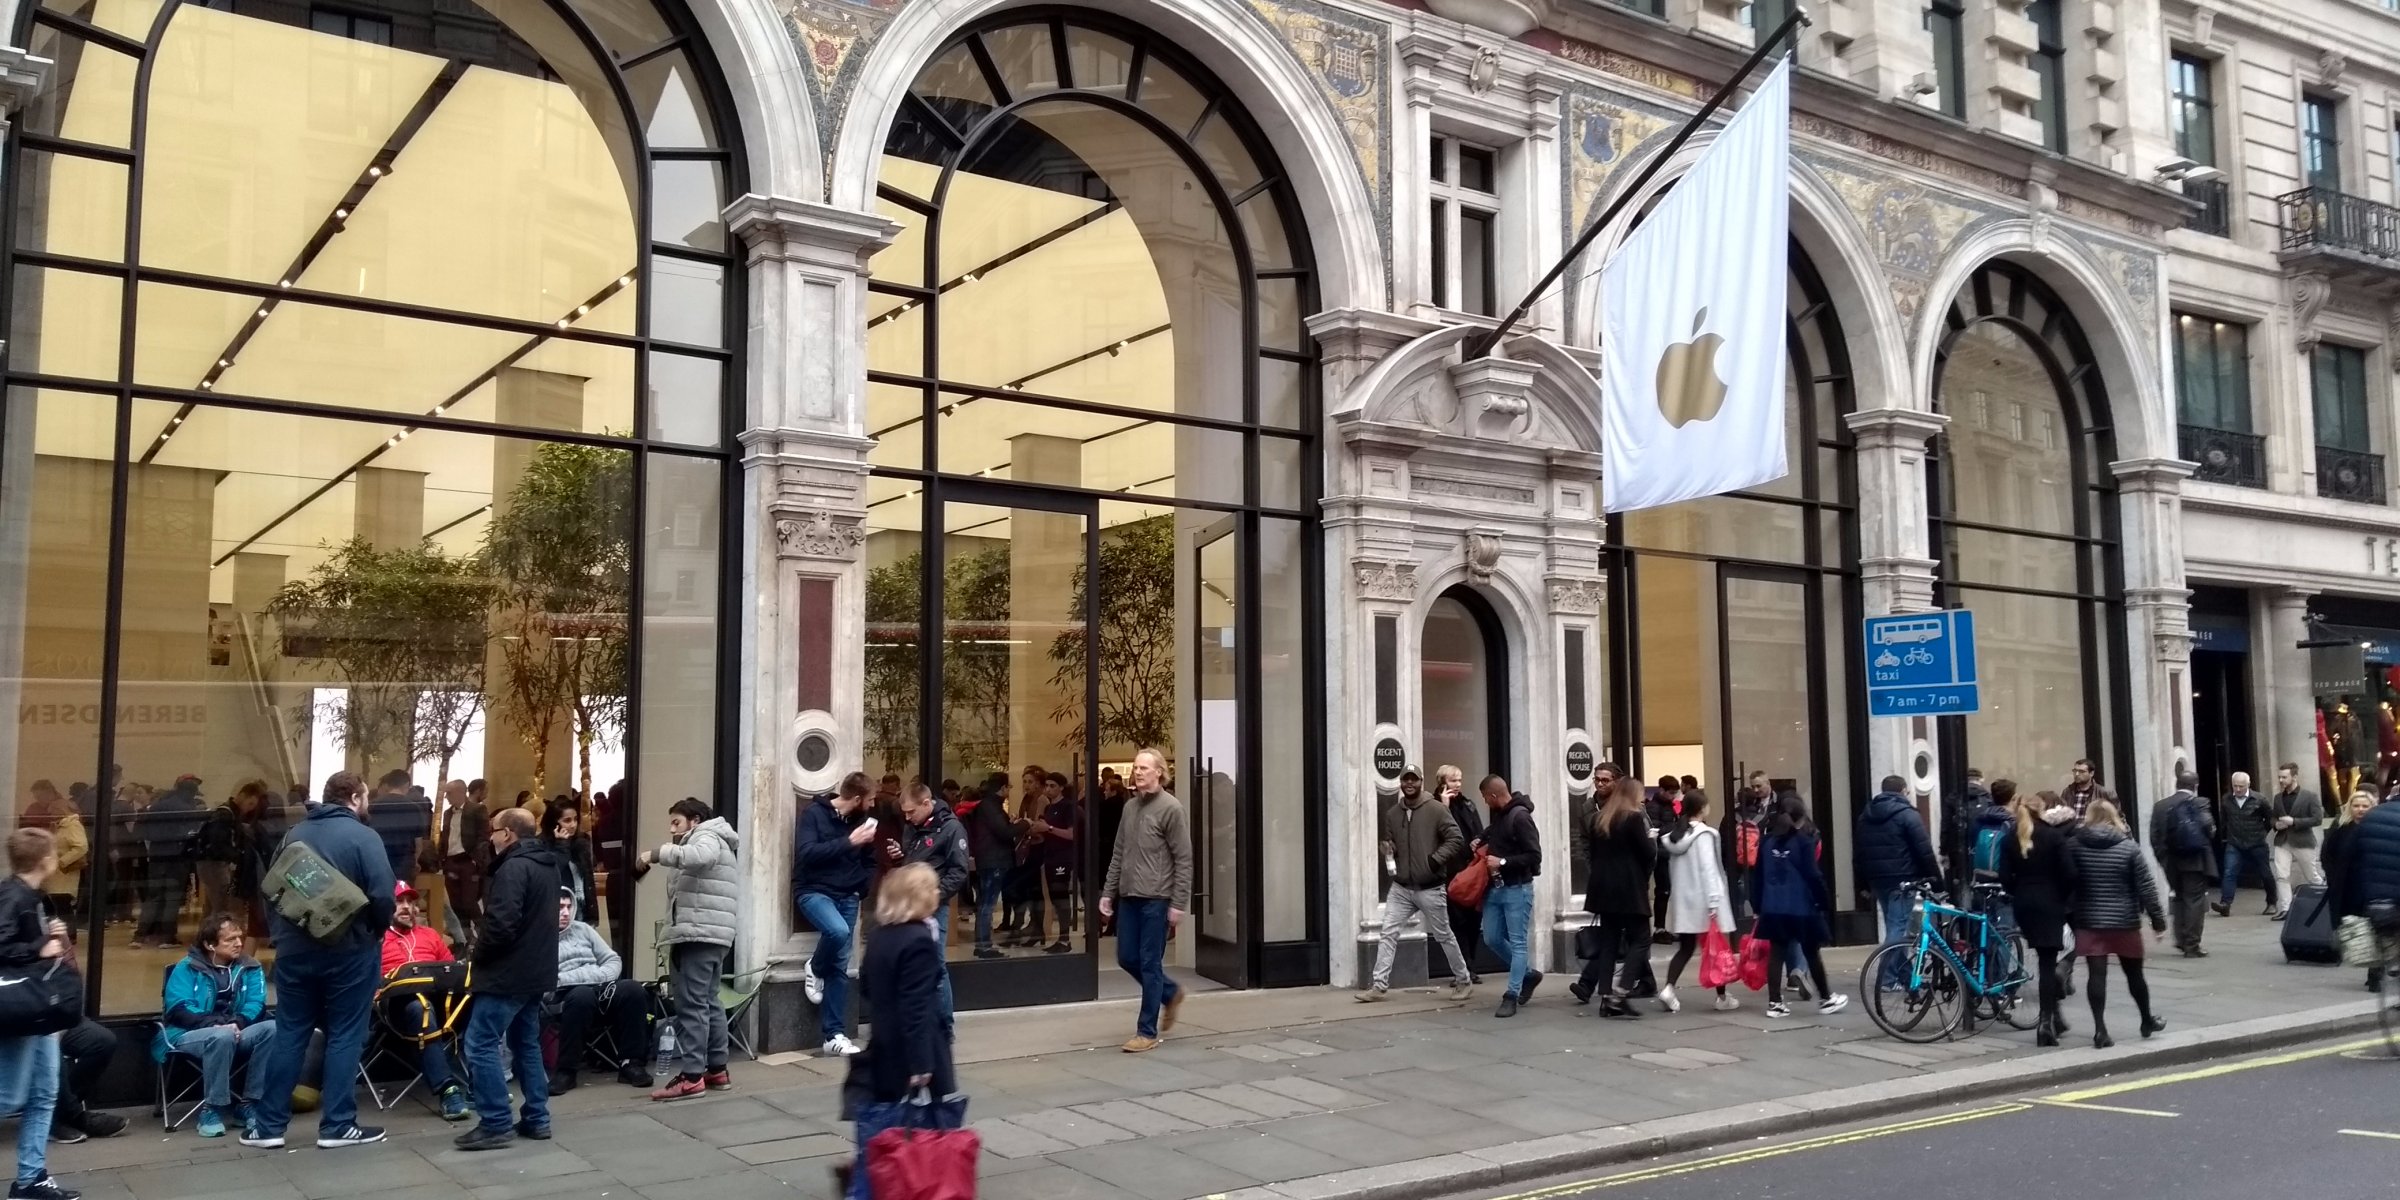 Apple Stores are attracting long lines for the iPhone X